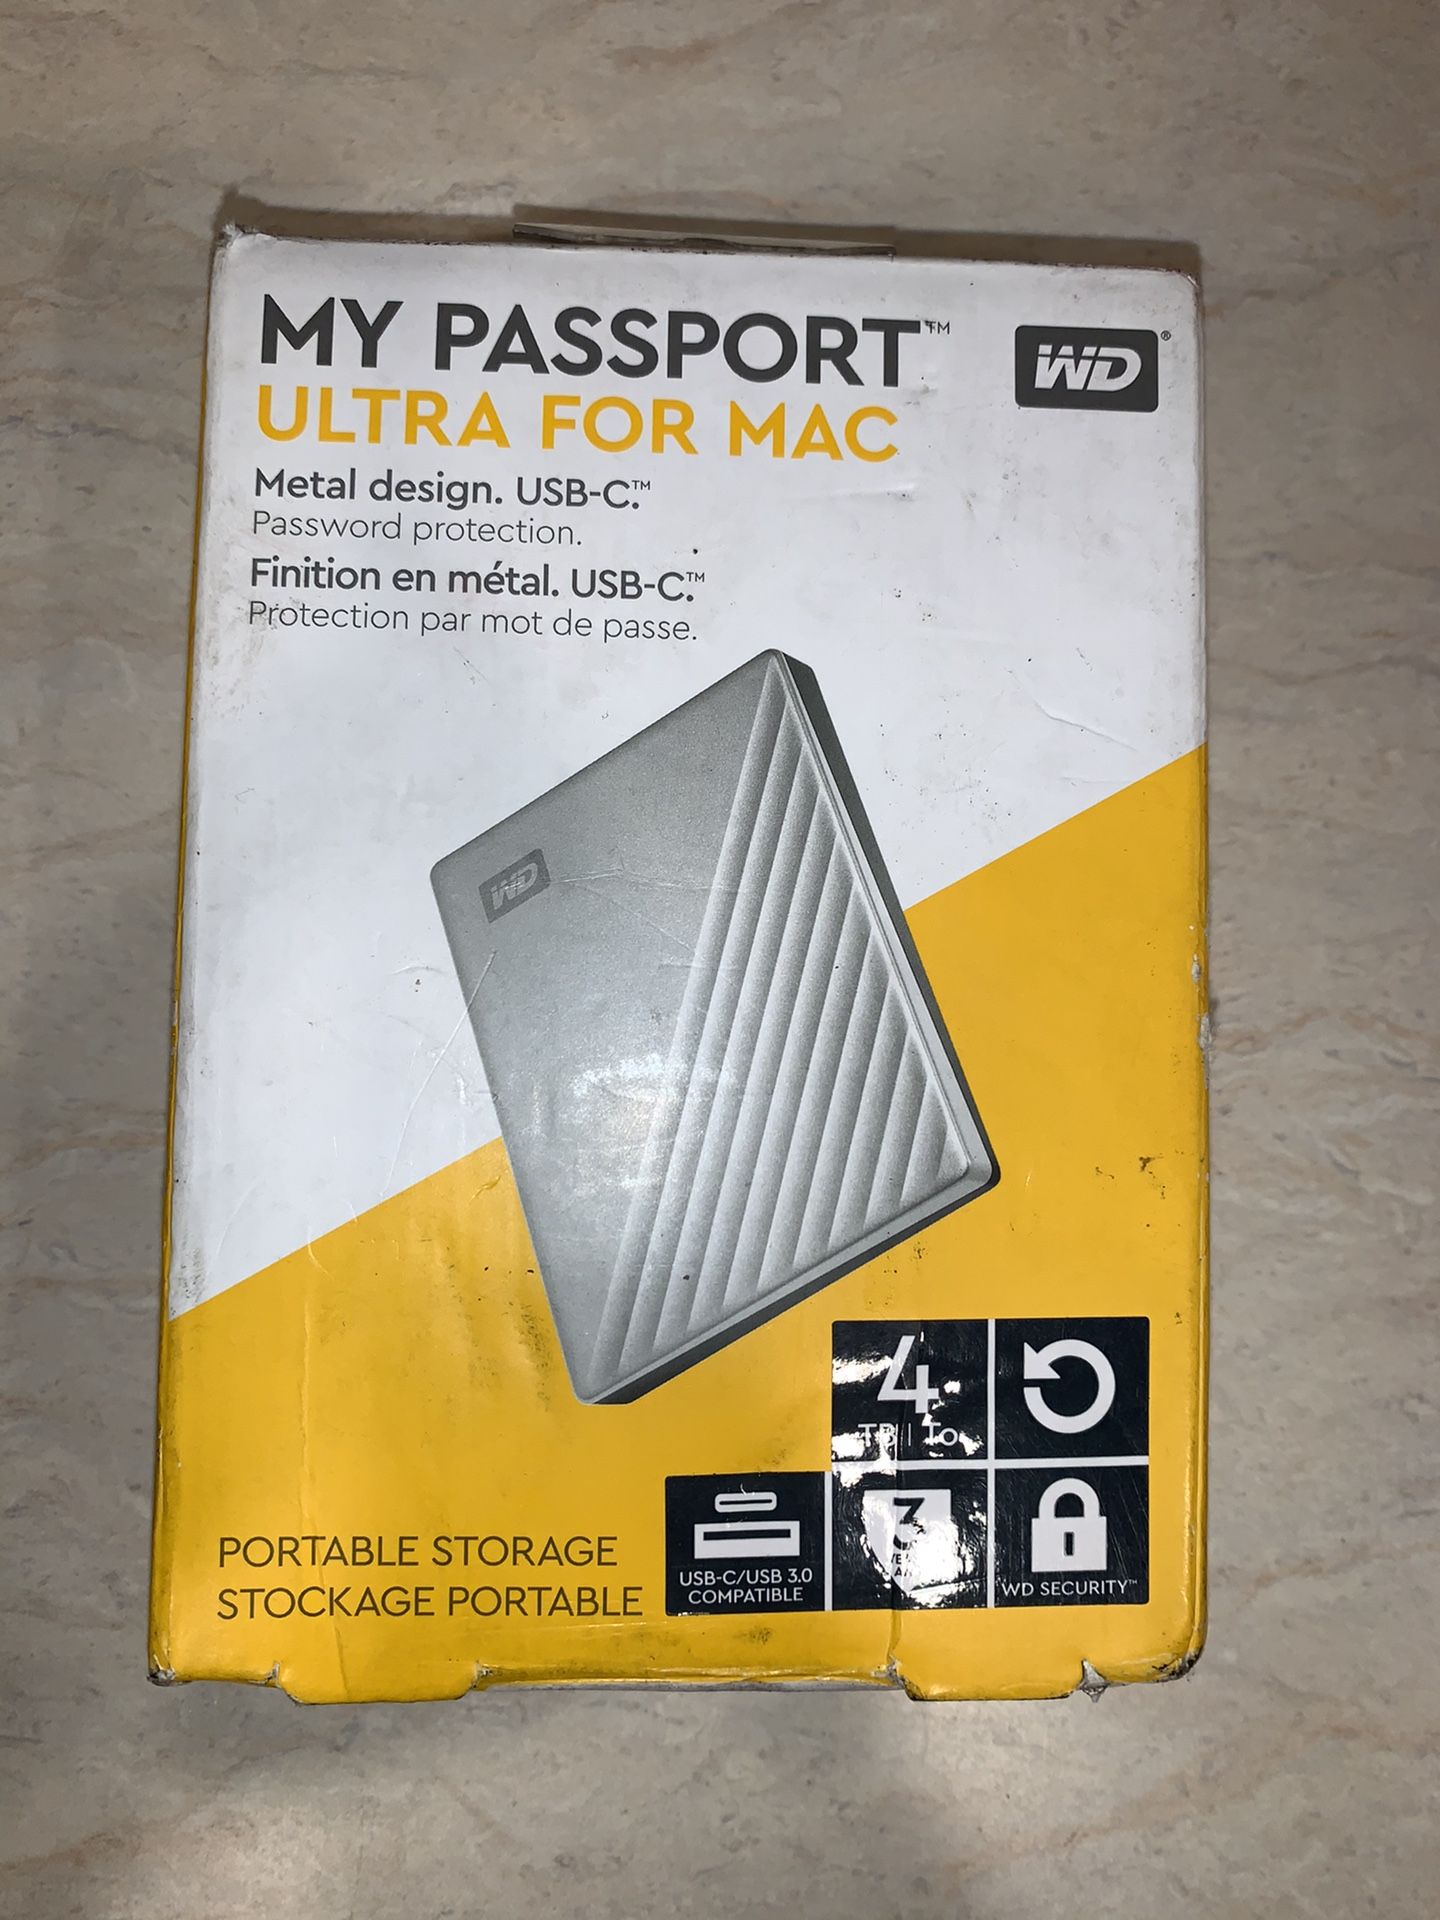 My passport ultra for MAC. $70 price is firm